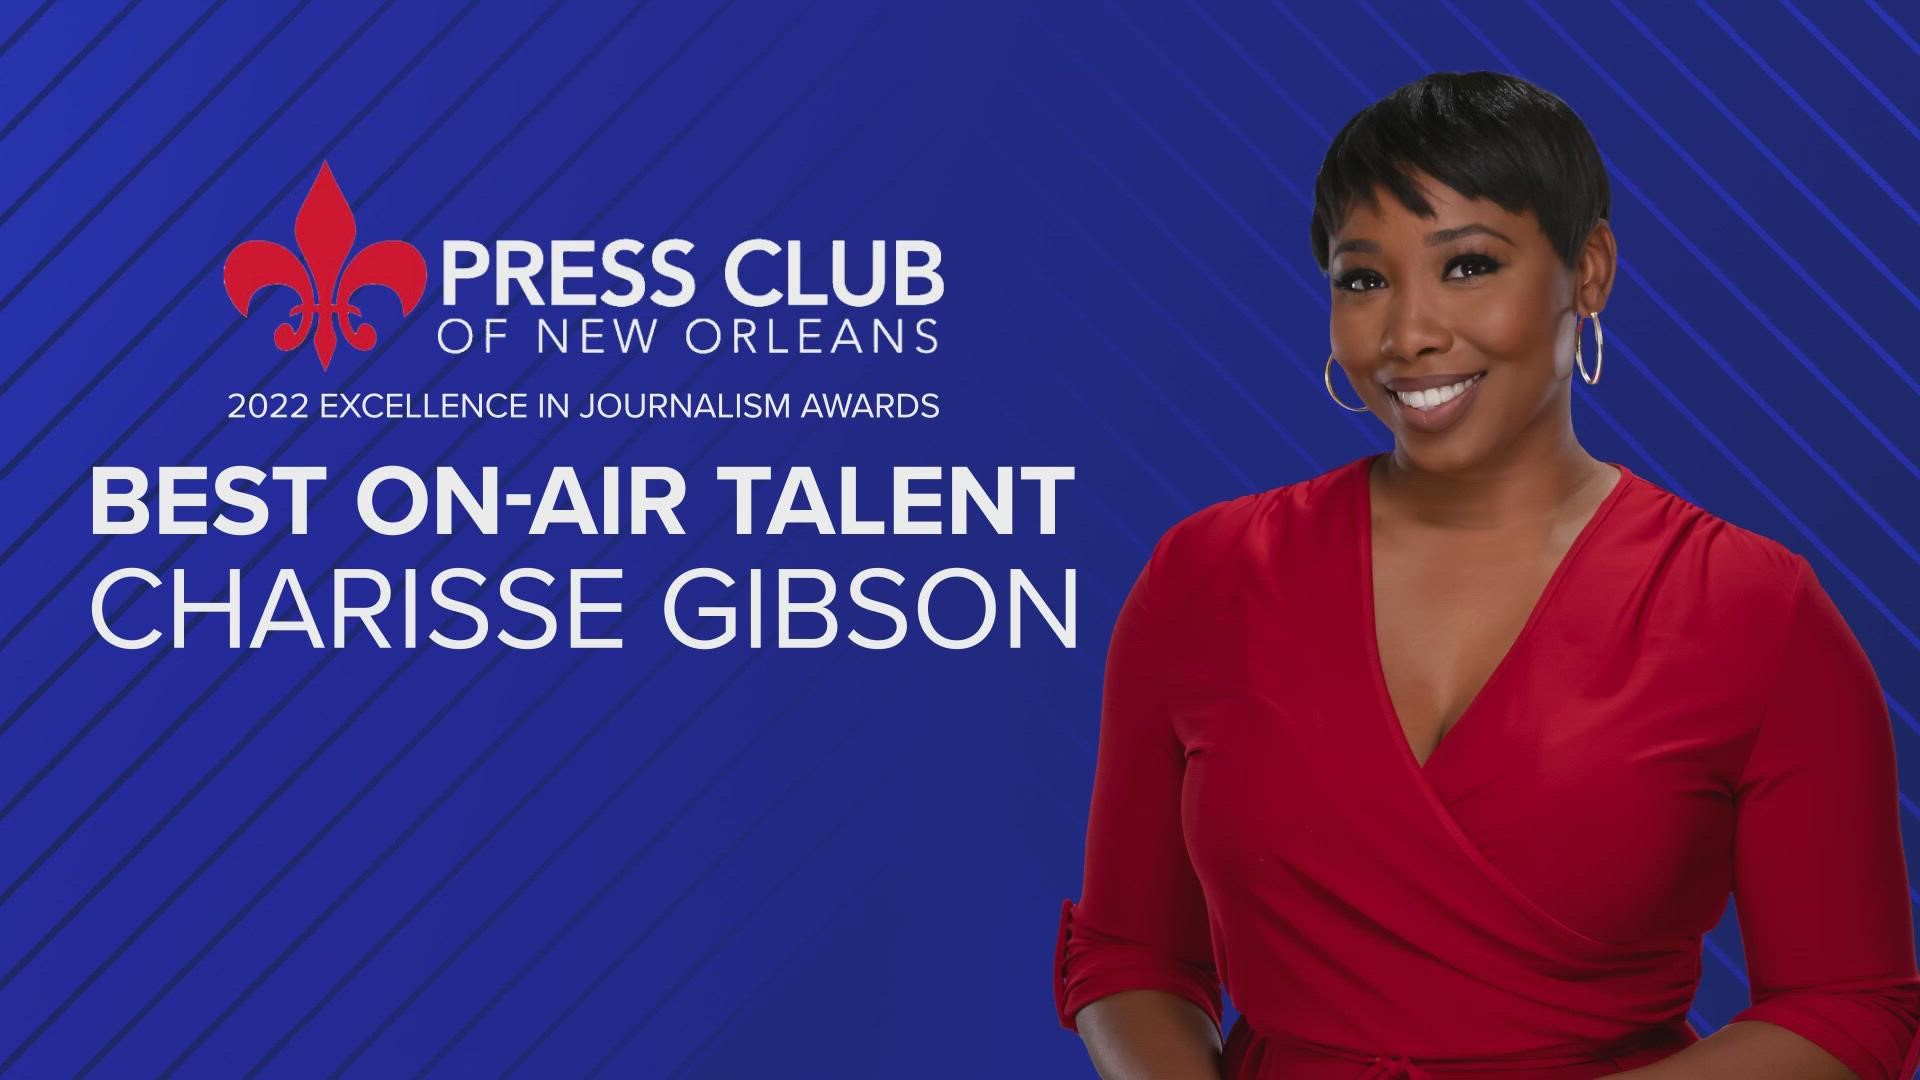 Born and raised in the city, Charisse has been an invaluable member of the station. Congratulations Charisse!